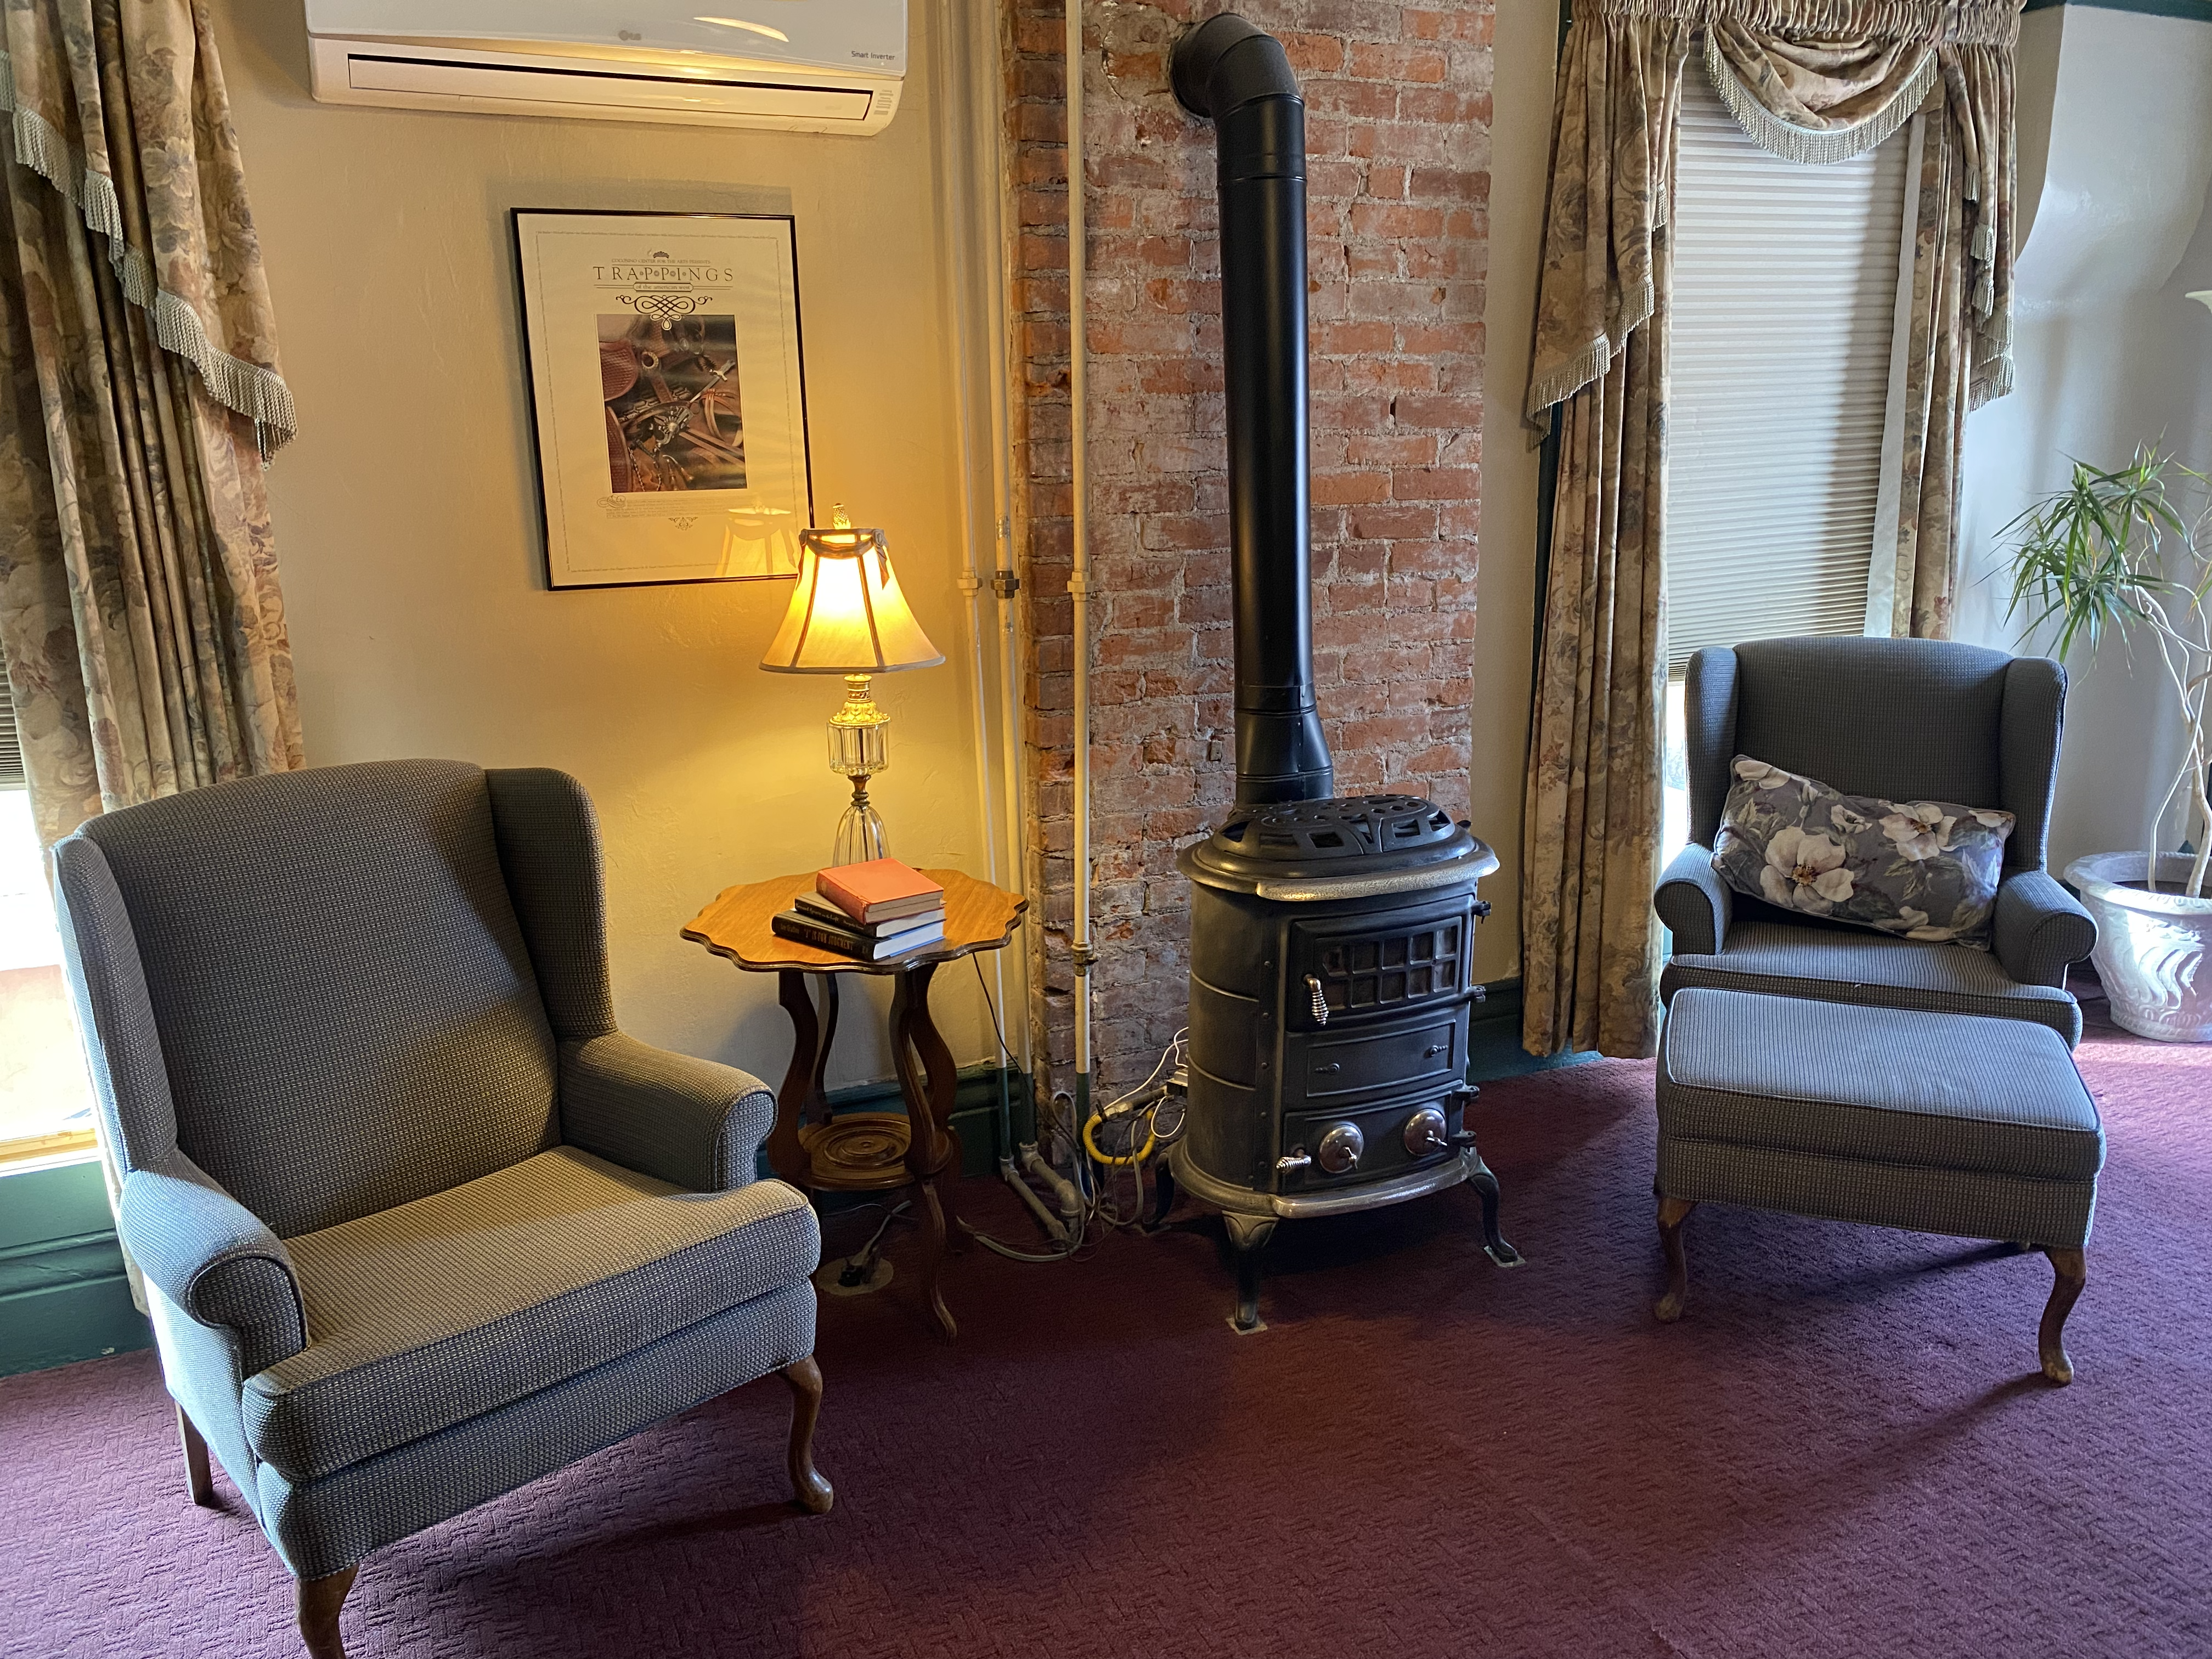 Winter reading list by the Weatherford Hotel in Flagstaff AZ | Find great new books